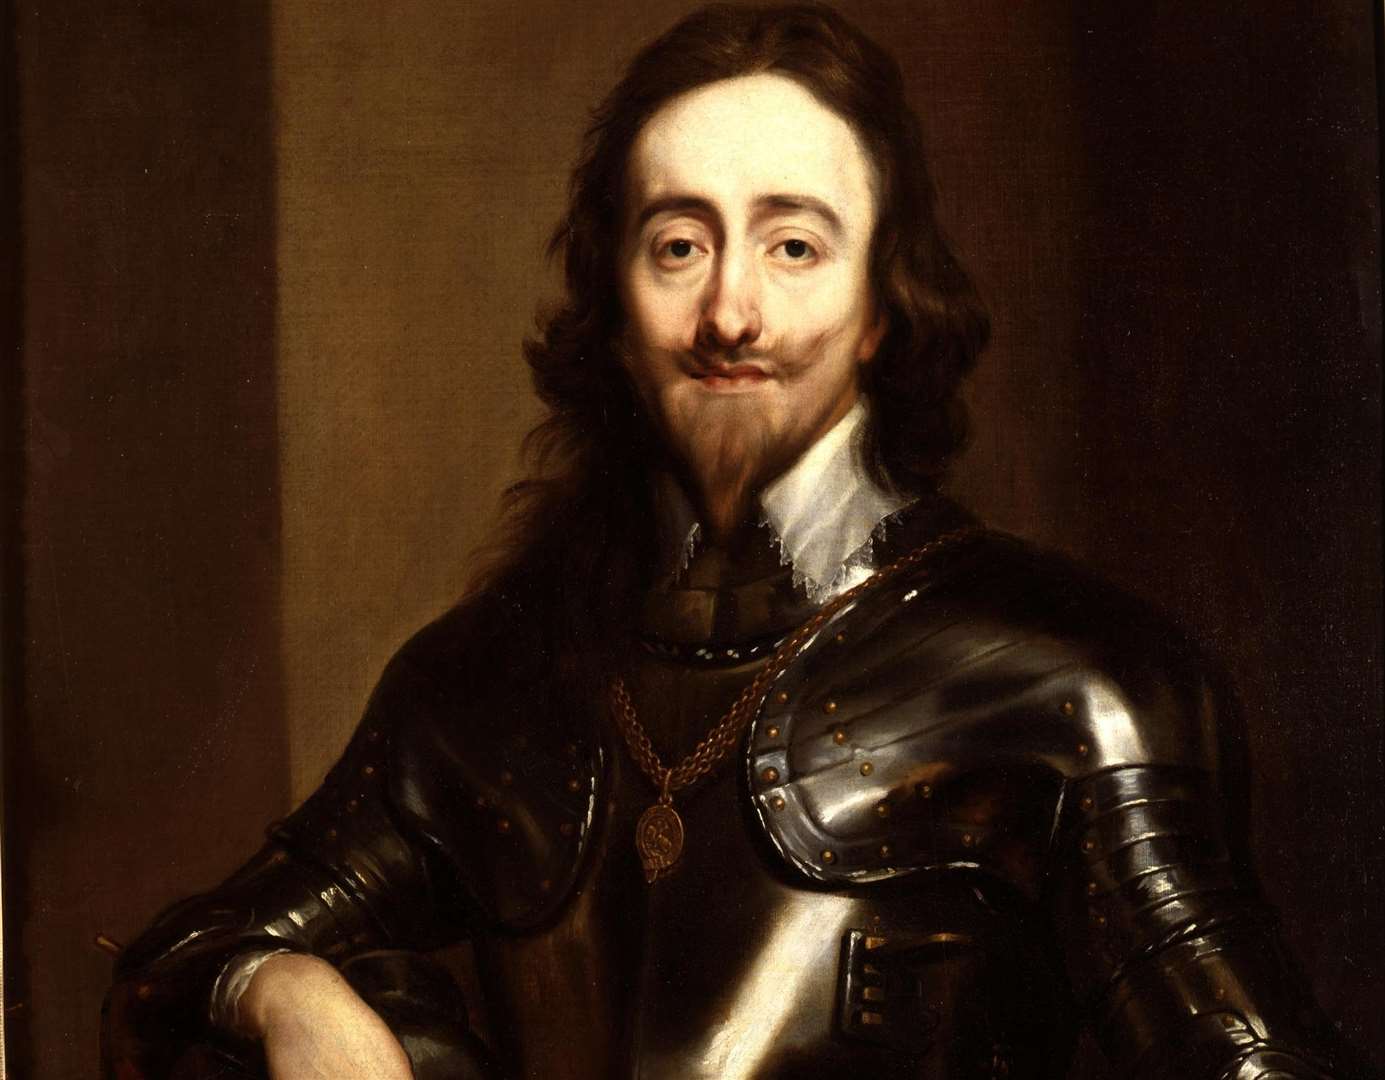 King Charles I reigned between 1625 and 1649